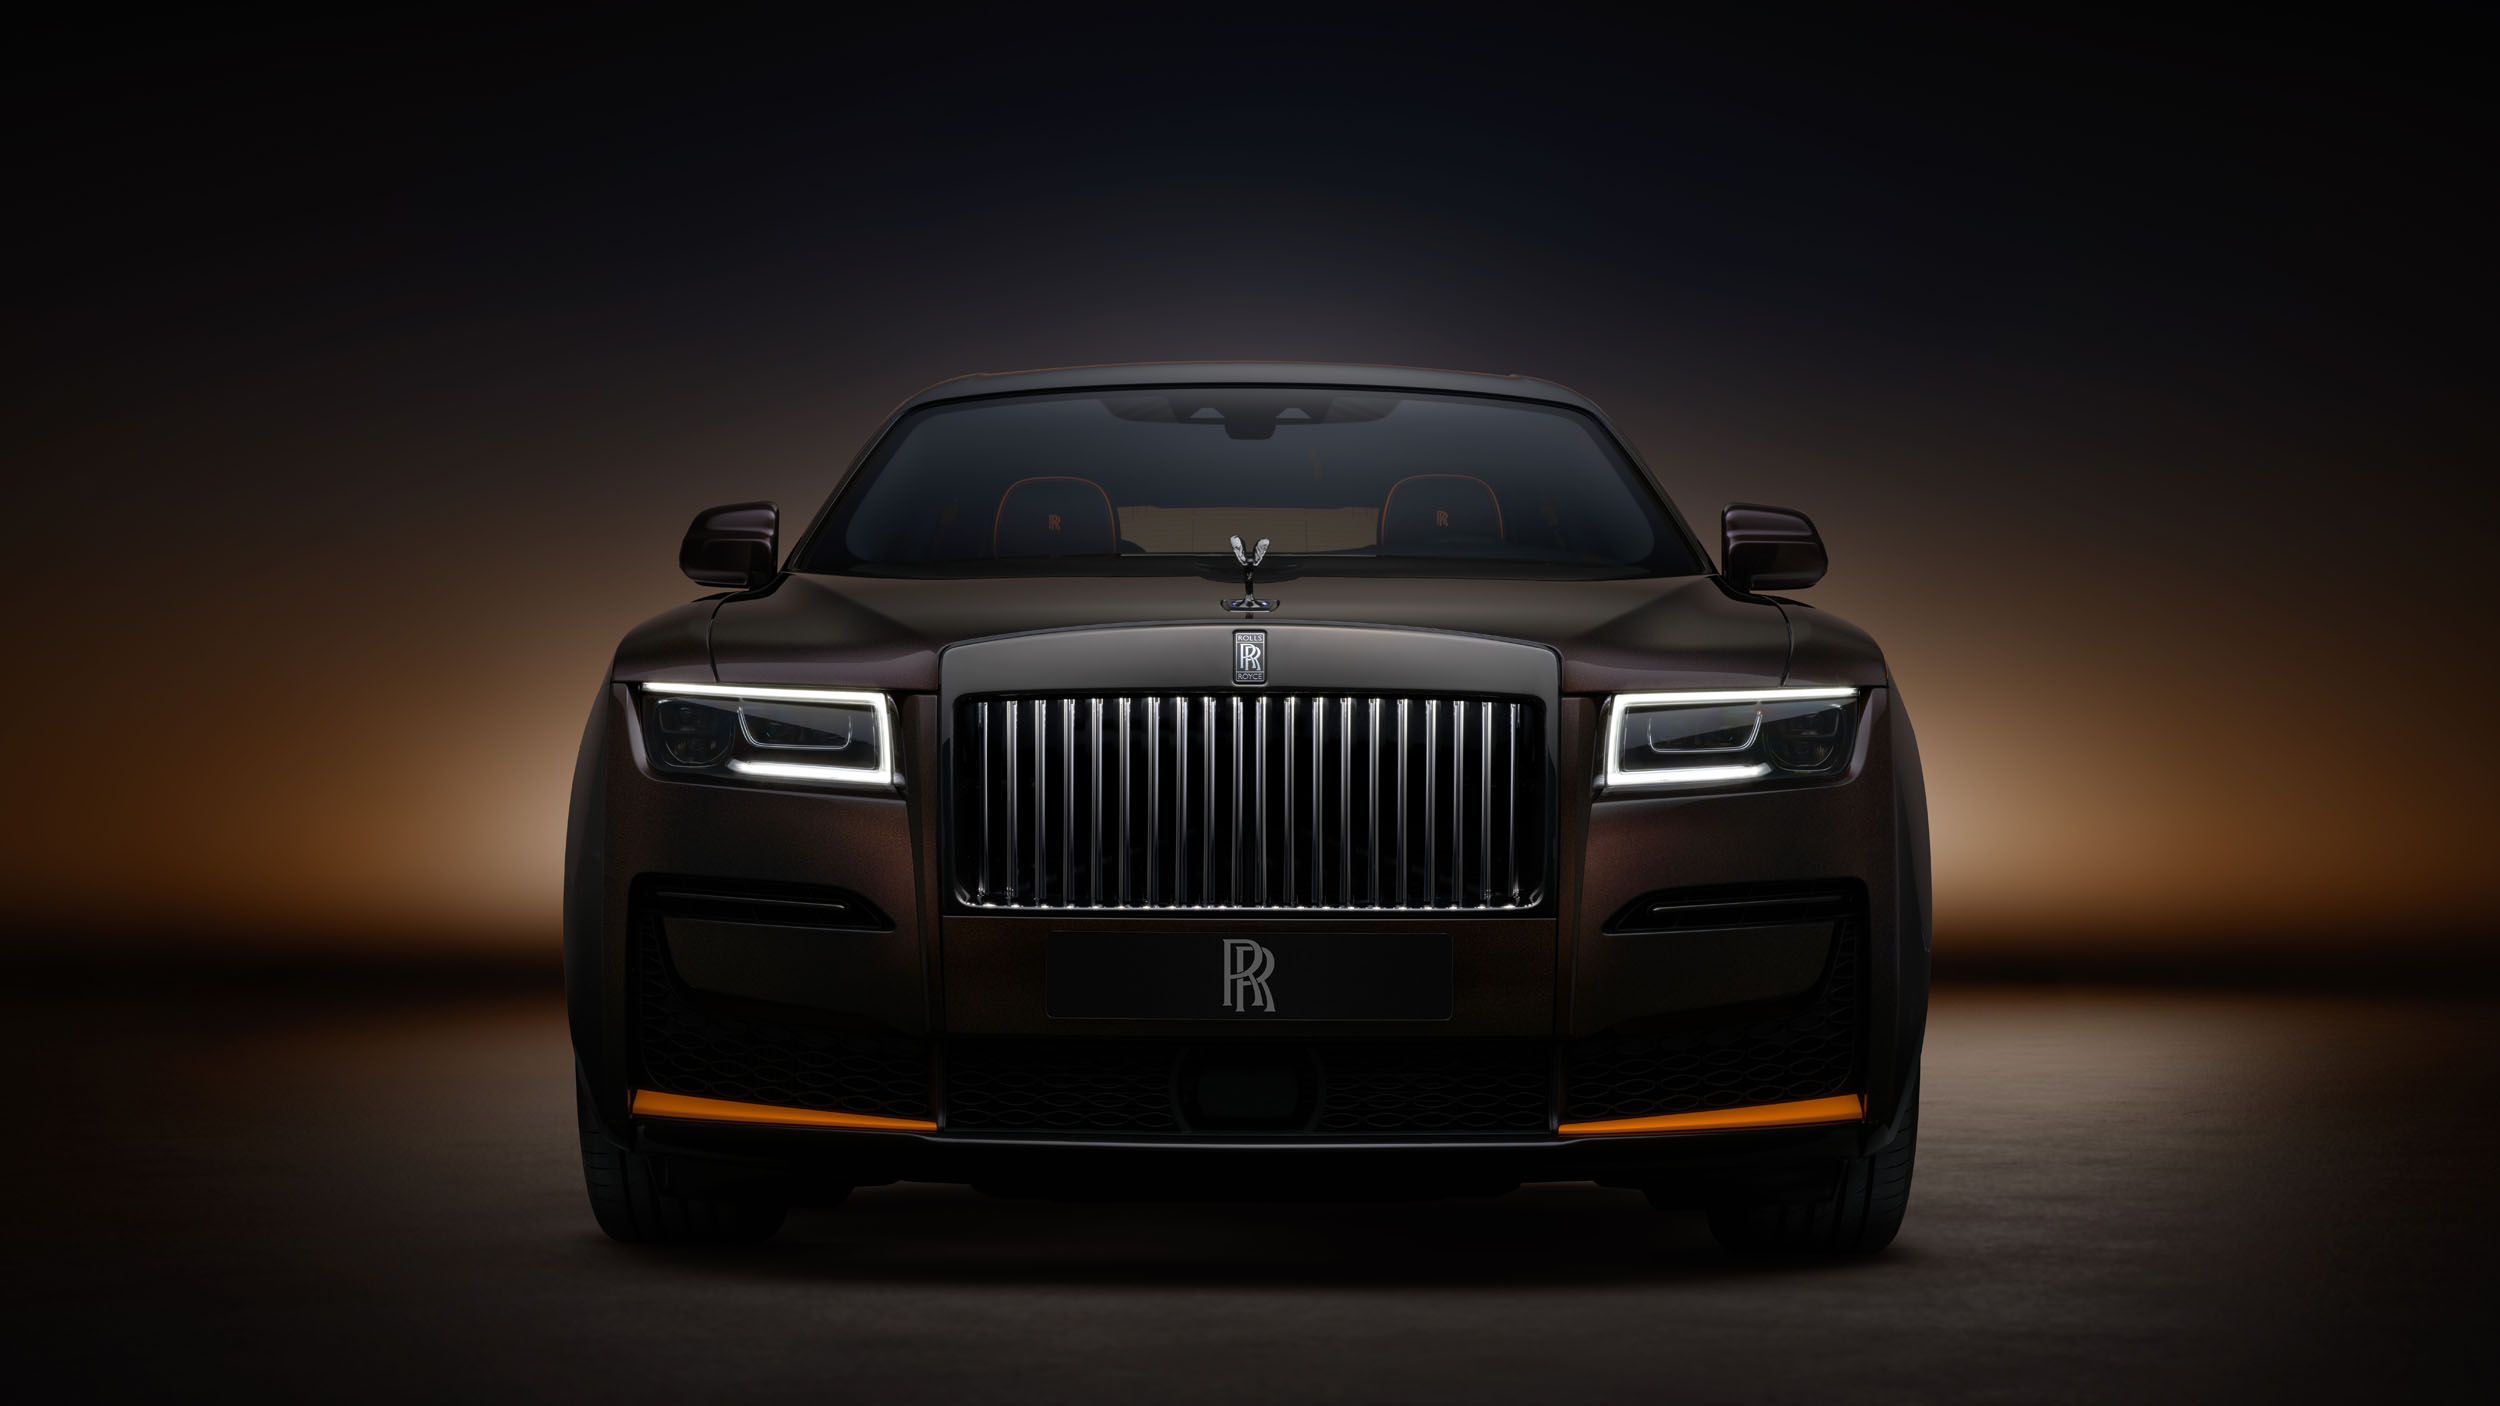 Rolls-Royce Cars and SUVs: Latest Prices, Reviews, Specs and